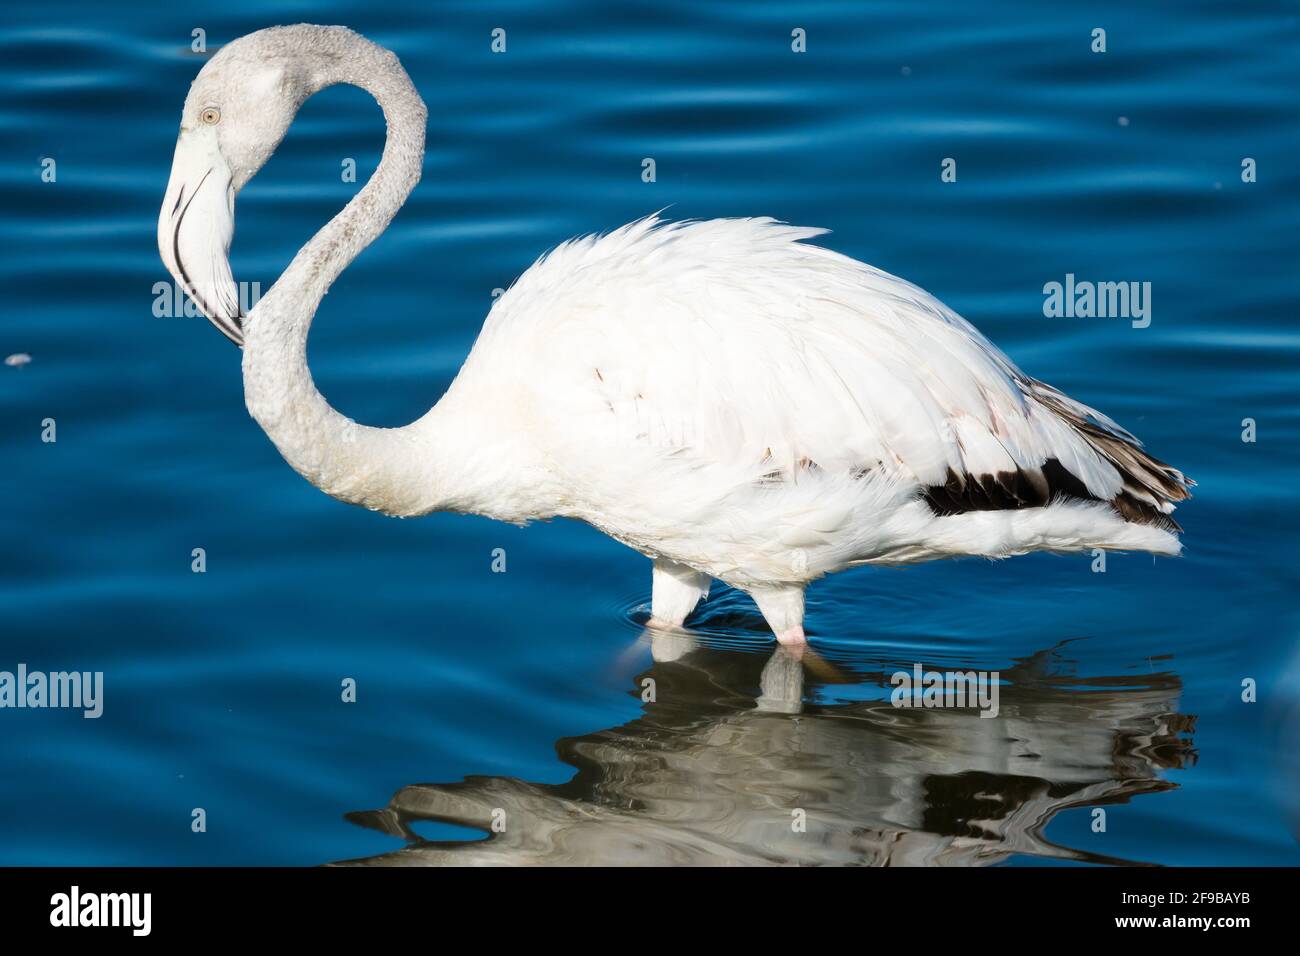 Greater flamingo (Phoenicopterus roseus) portrait closeup standing in water in the wild in Cape Town, South Africa Stock Photo